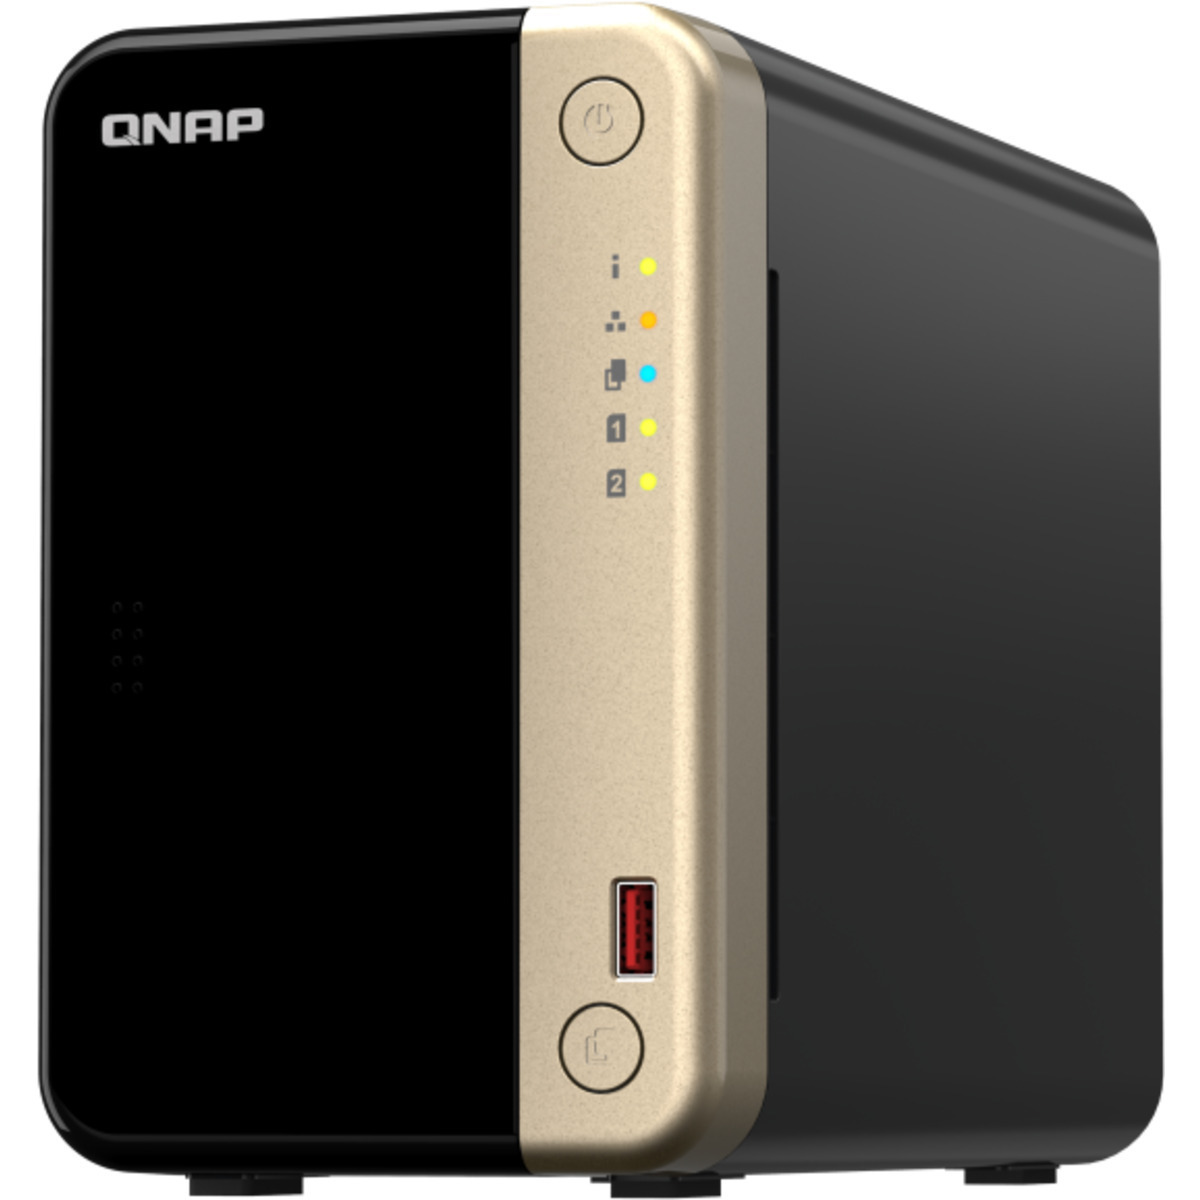 QNAP TS-264 8tb 2-Bay Desktop Multimedia / Power User / Business NAS - Network Attached Storage Device 2x4tb Western Digital Blue WD40EZRZ 3.5 5400rpm SATA 6Gb/s HDD CONSUMER Class Drives Installed - Burn-In Tested - ON SALE TS-264